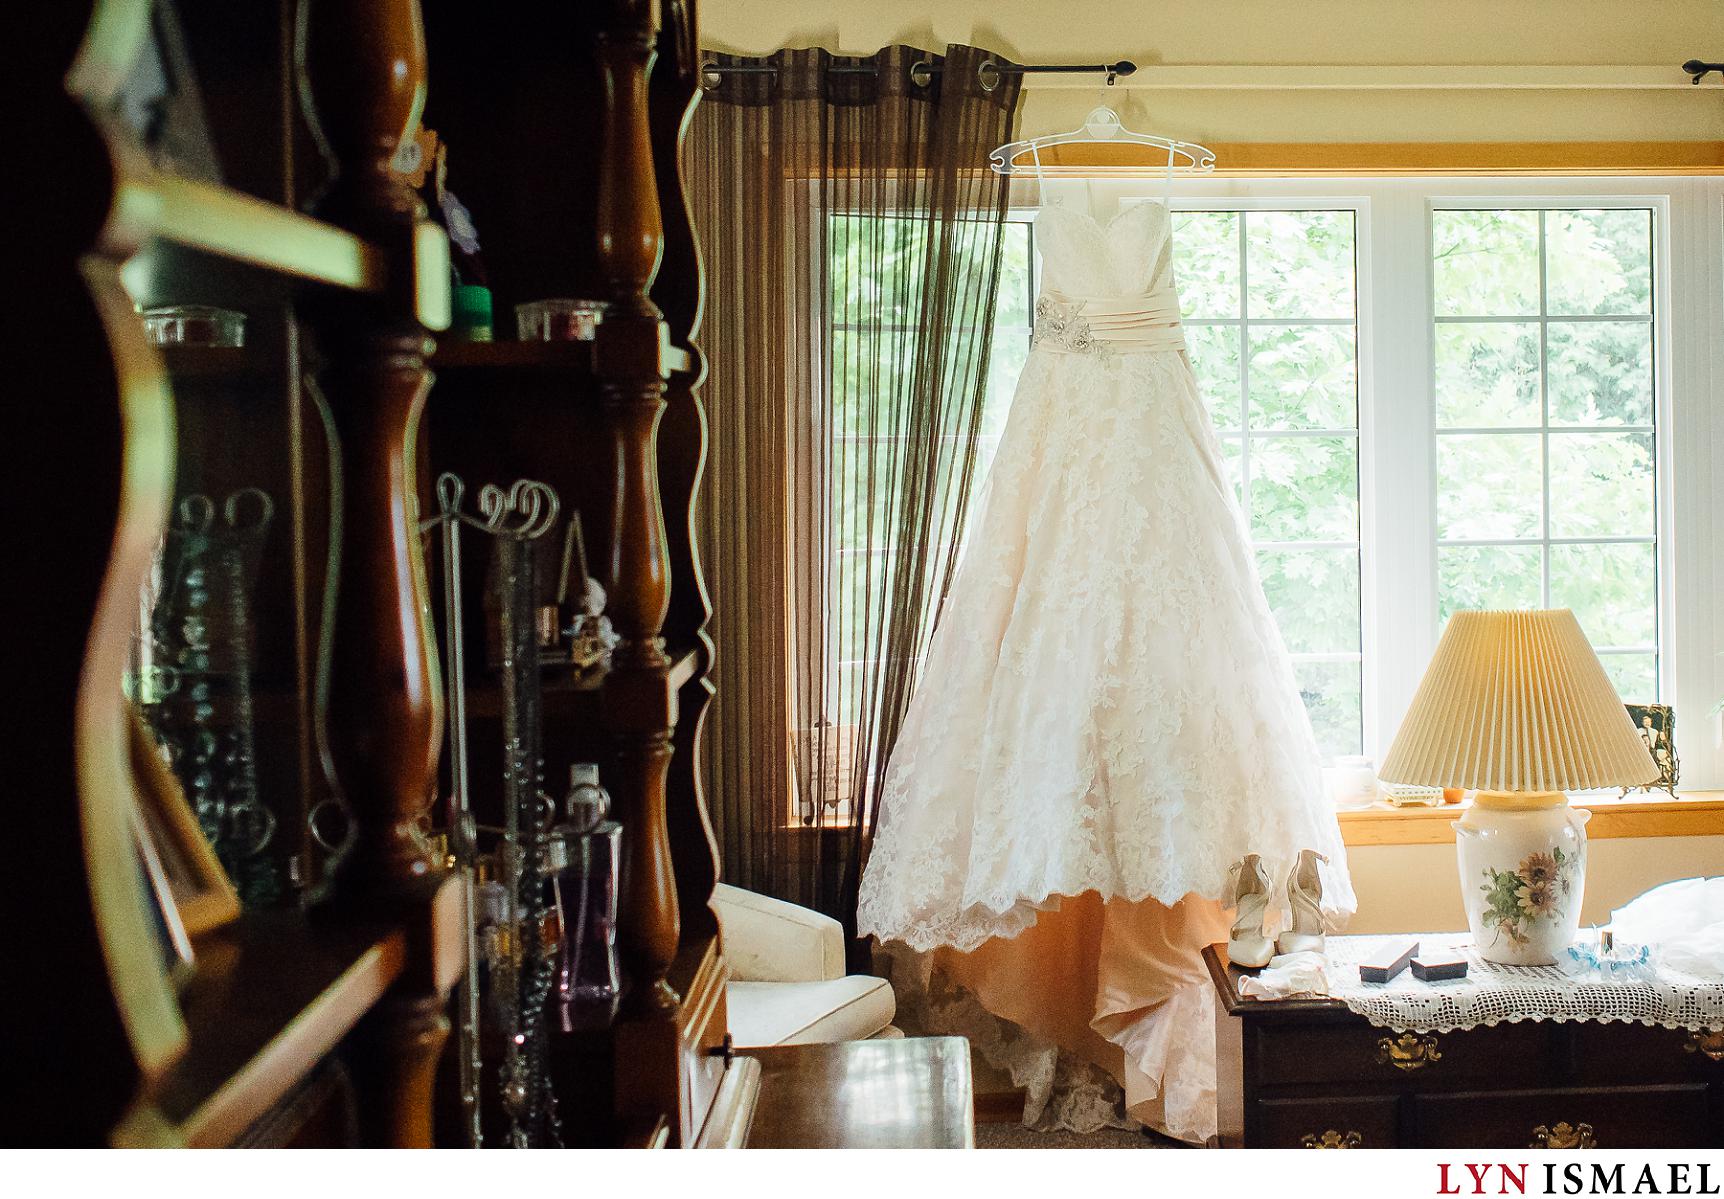 Bride's dress hanging by the window